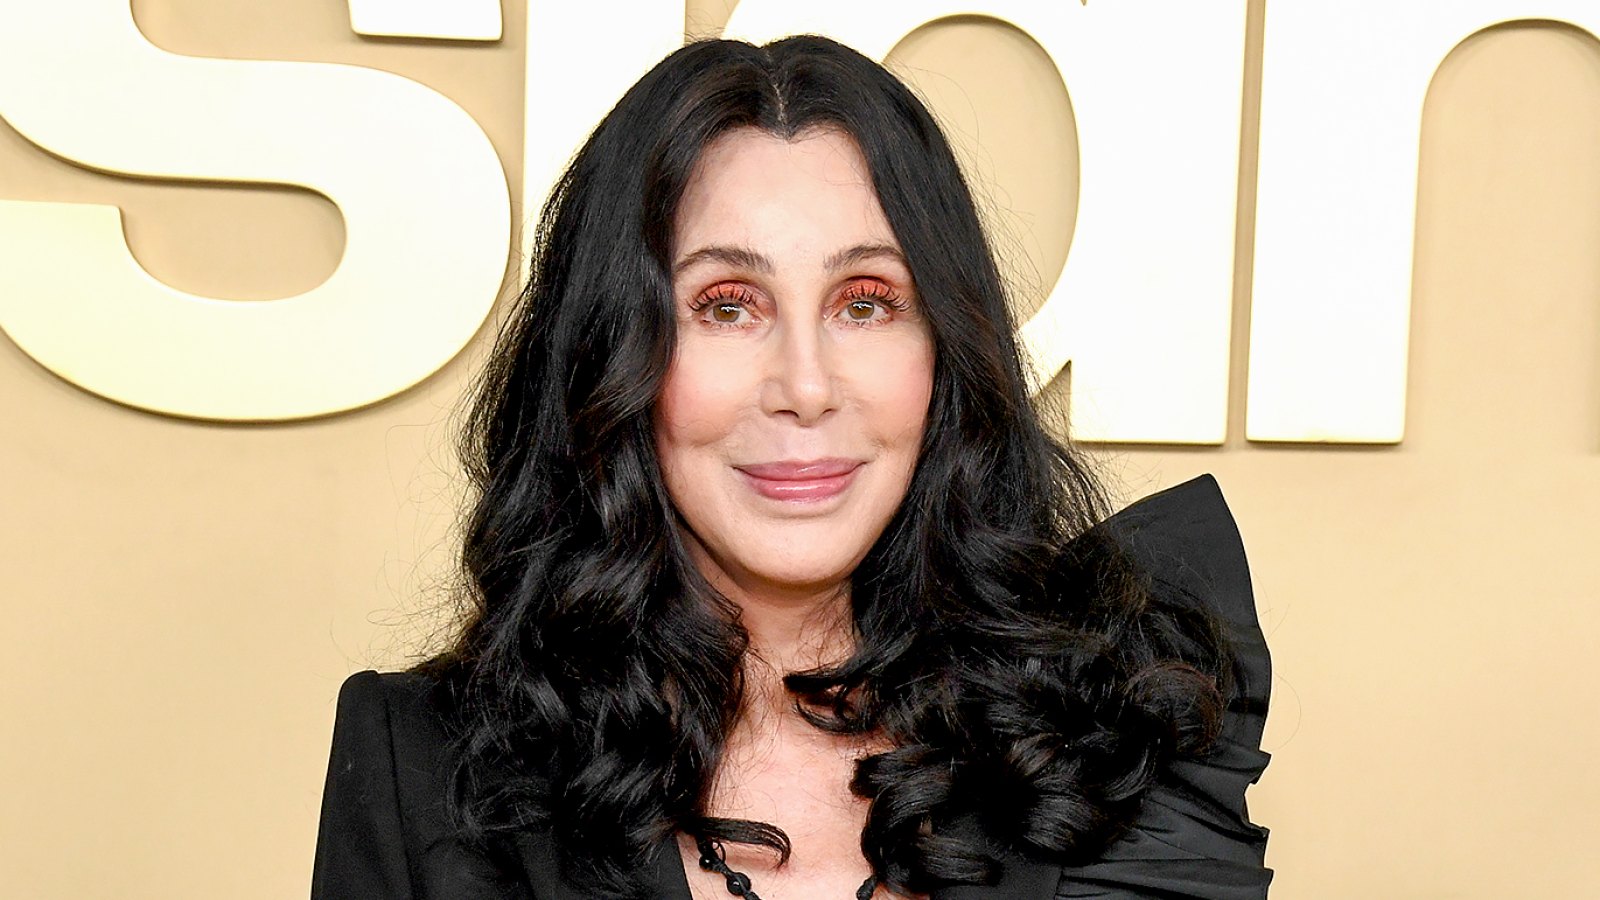 Cher Isn't Changing Her Style